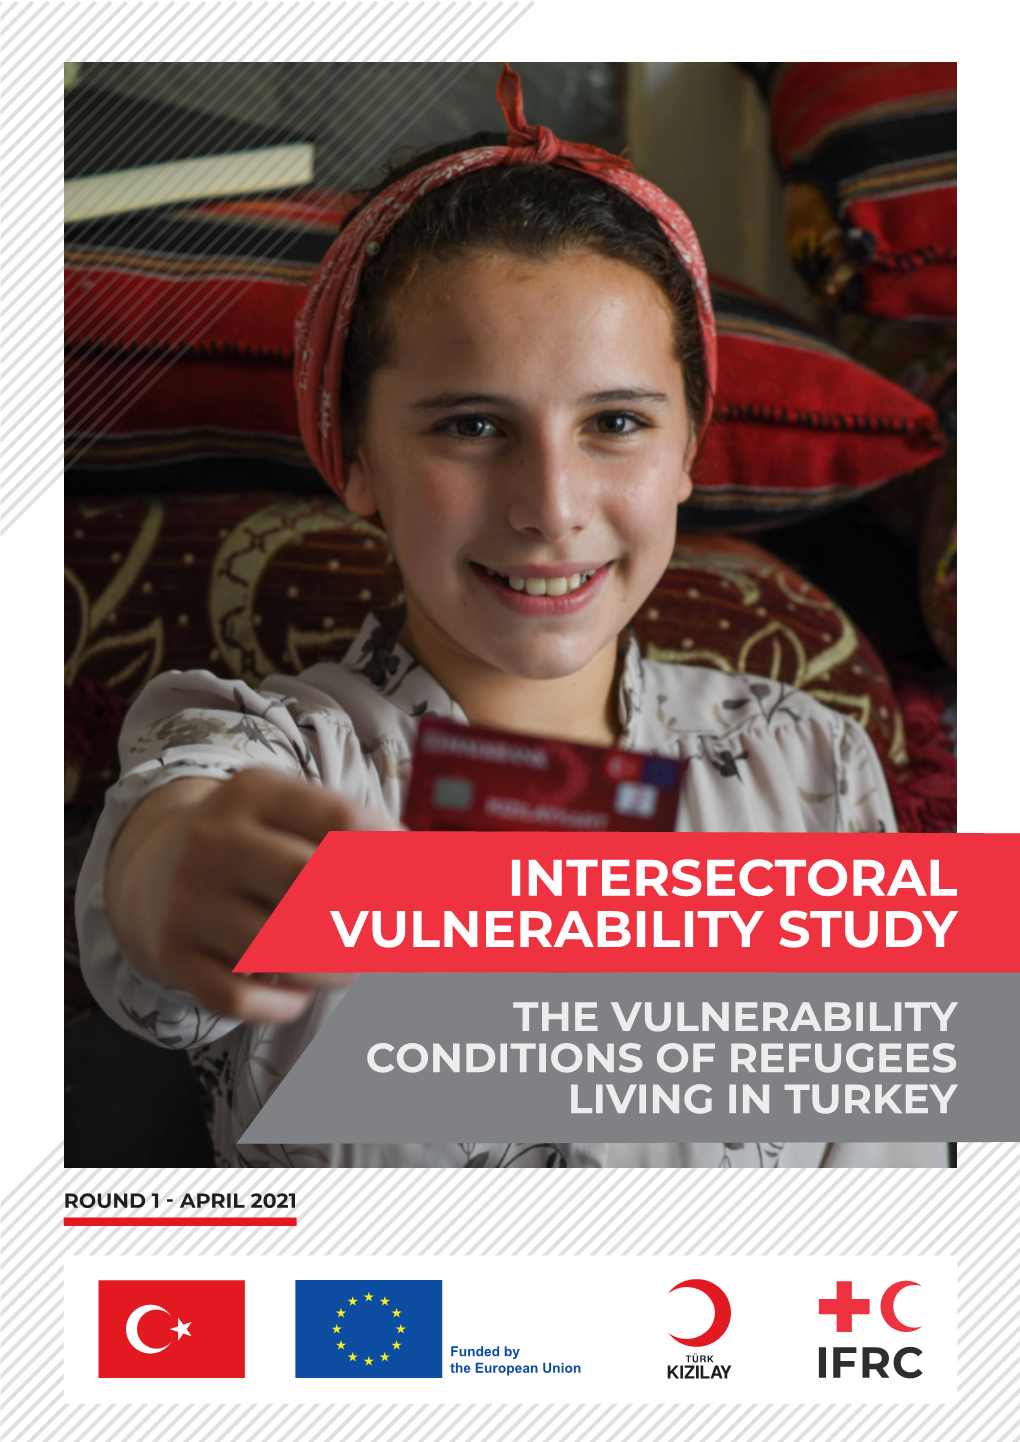 Intersectoral Vulnerability Study the Vulnerability Conditions of Refugees Living in Turkey